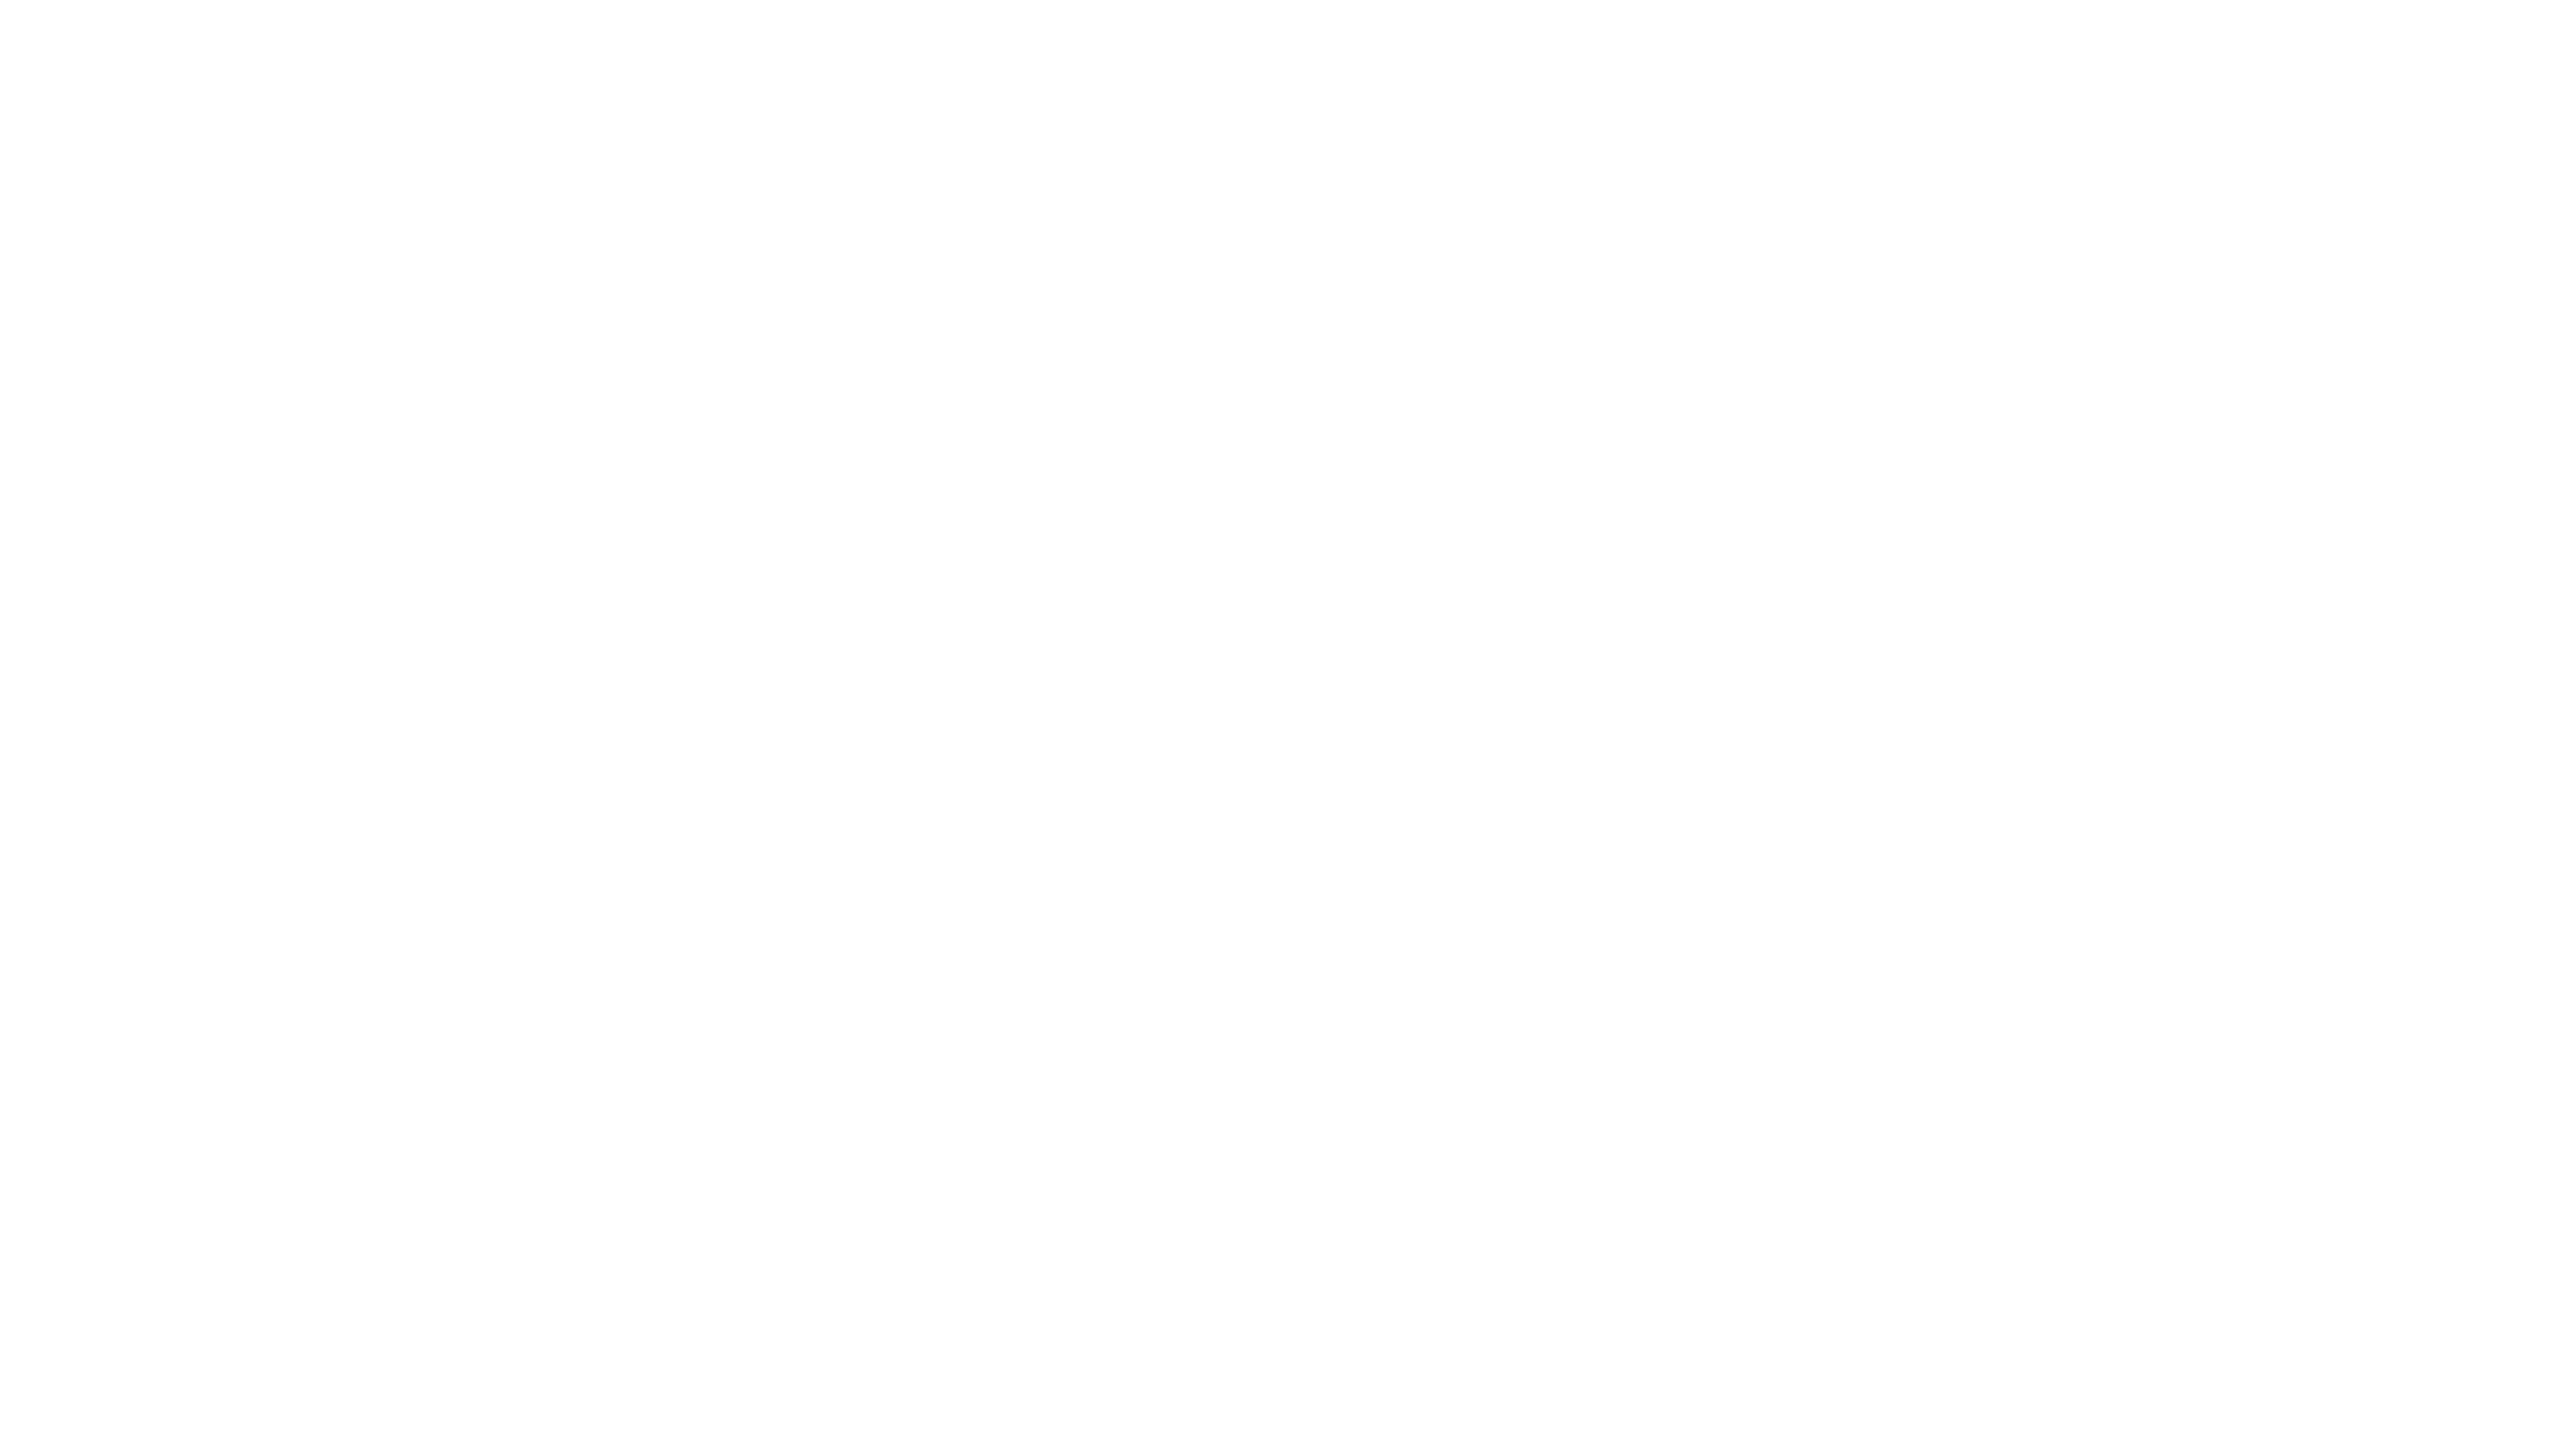 800x800-spend.png